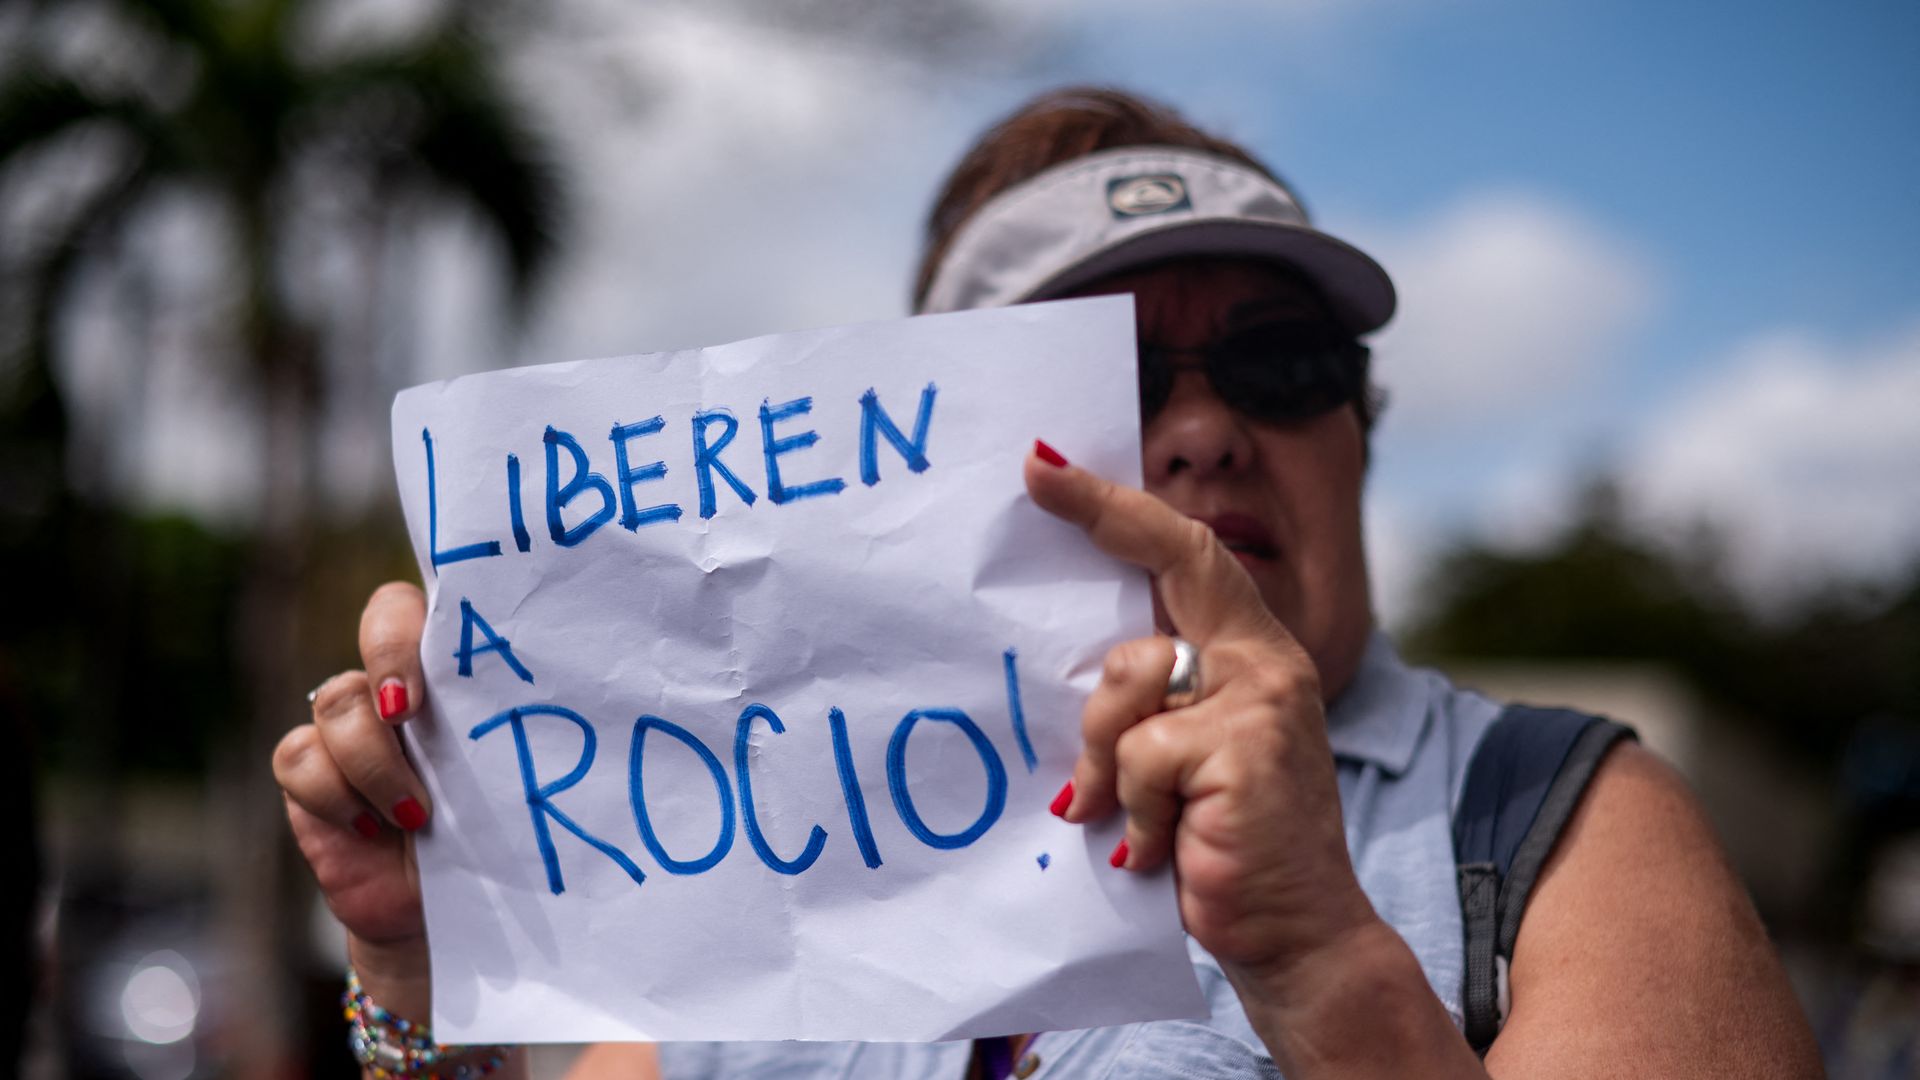 A woman in a sun visor holds up a paper sign that says "free Rocio" in Spanish. The paper is covering half of her face